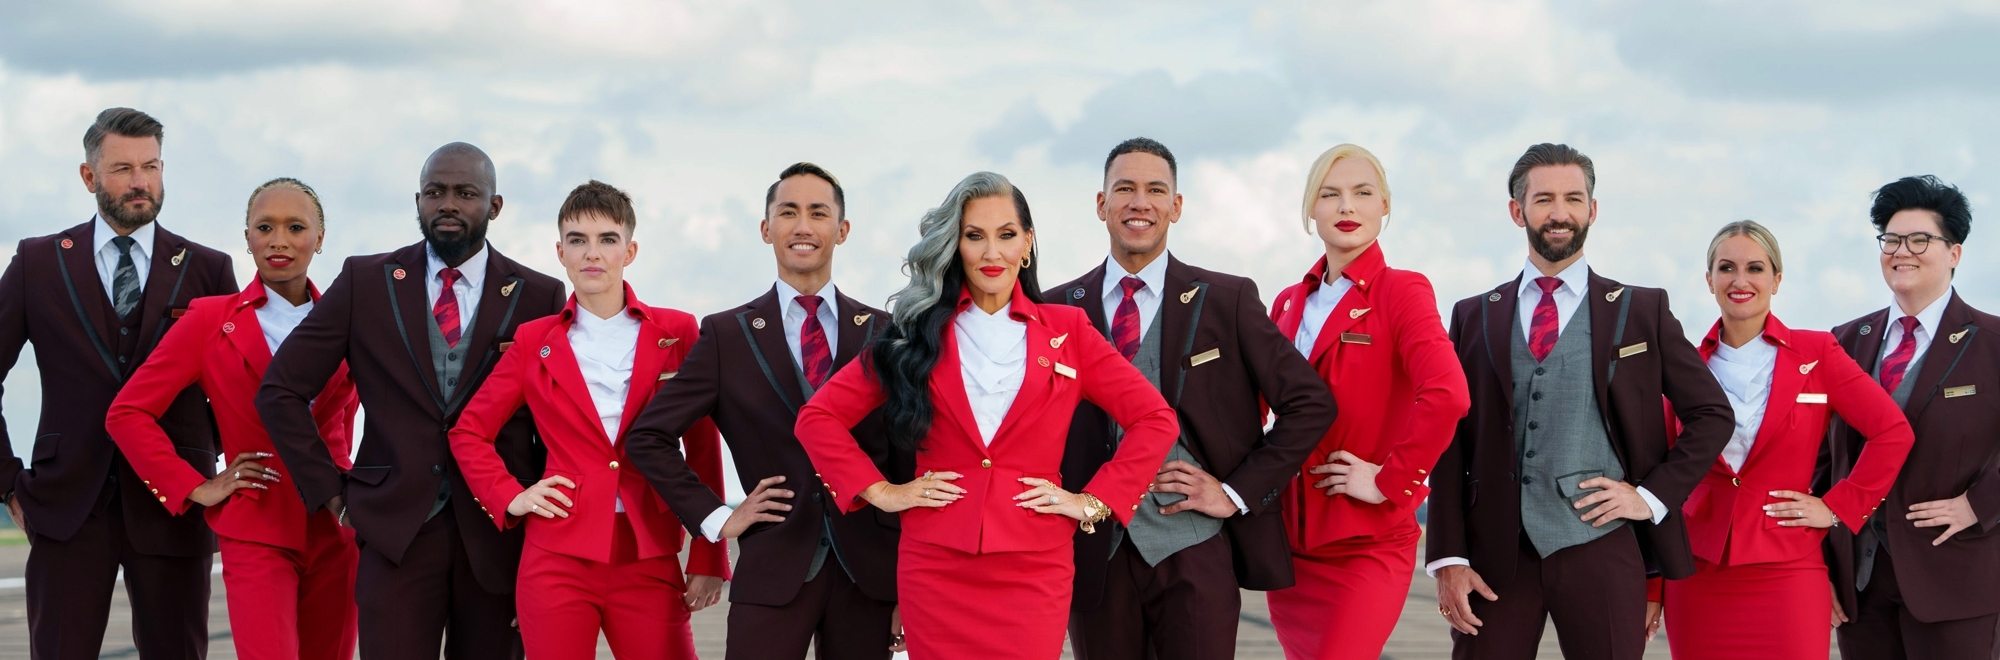 Virgin Atlantic updates its gender identity policy in style